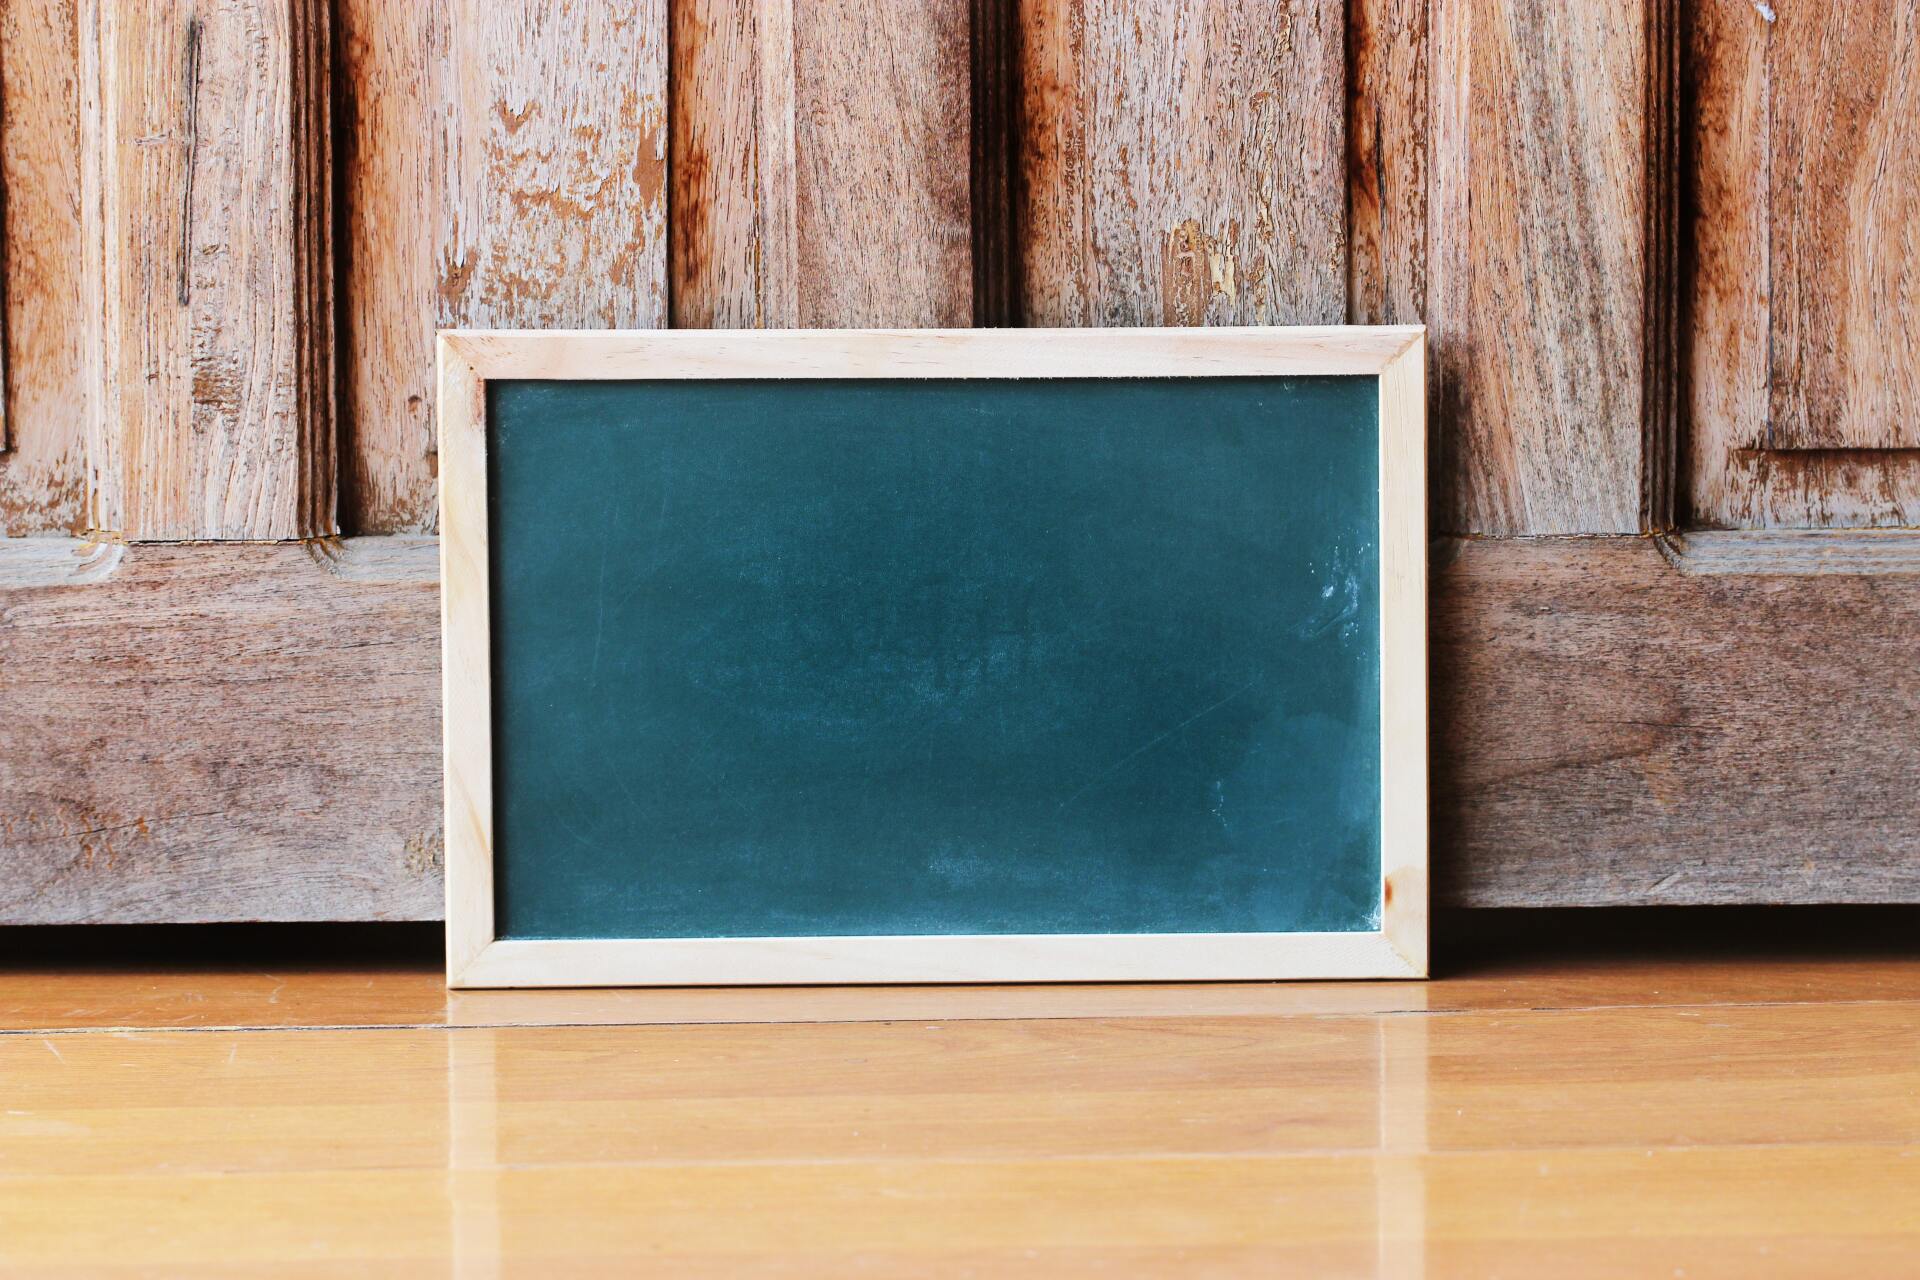 A small square blackboard is sitting on the floor in fron of two large wooden doors